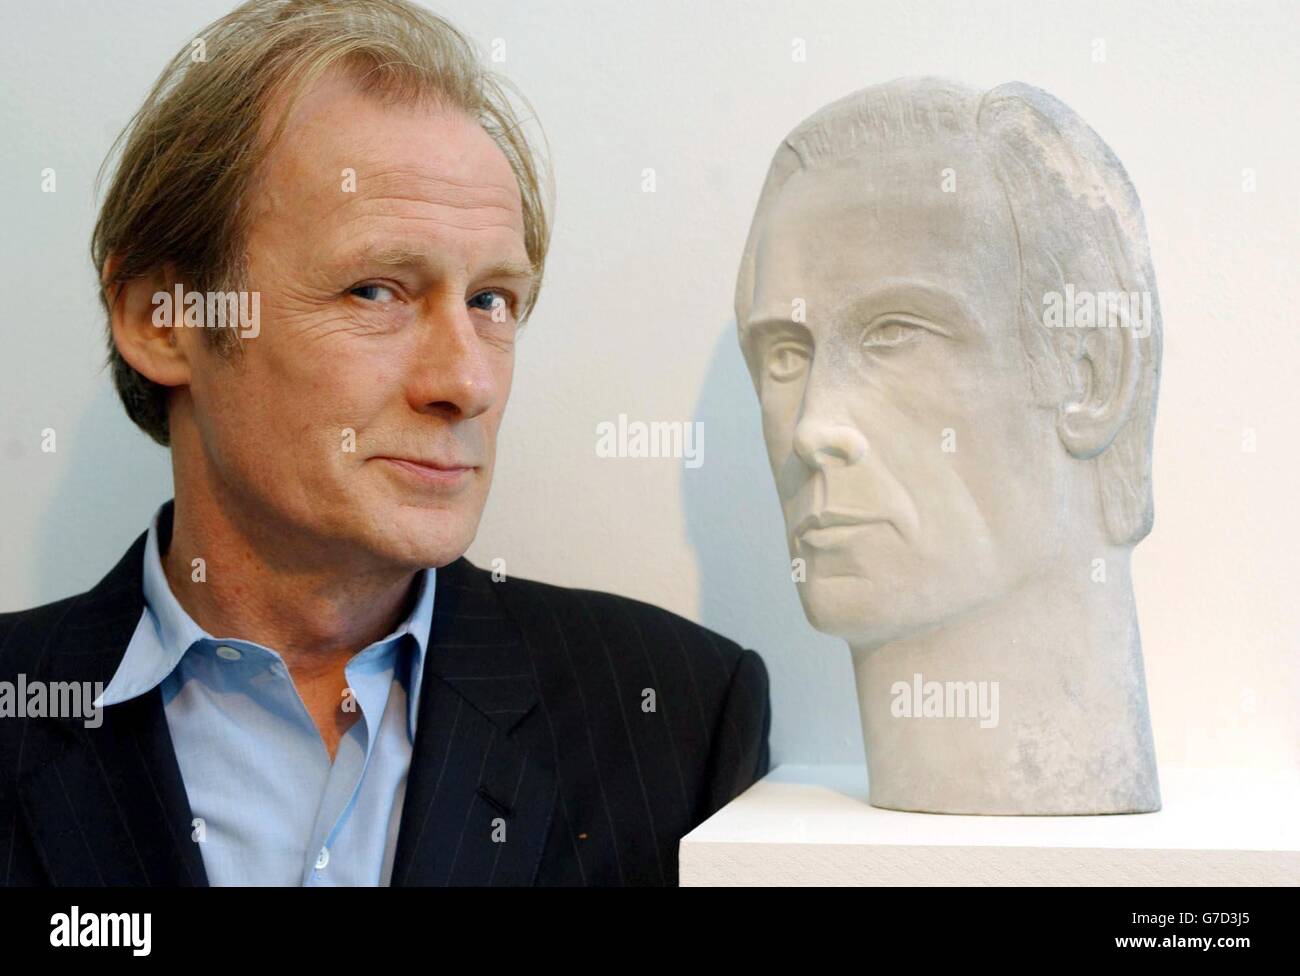 Actor Bill Nighy poses with a bust of himself by sculptor Glenys Barton - which is featured in the forthcoming film 'Enduring love' (starring Nighy, Daniel Craig and Samantha Morton) - during a photocall at Flowers East Gallery in east London. The film which opens next week features in The Times bfi London Film Festival. The bust forms part of an exhibition of Barton's work showing at Flowers East Gallery til 20 November. Stock Photo